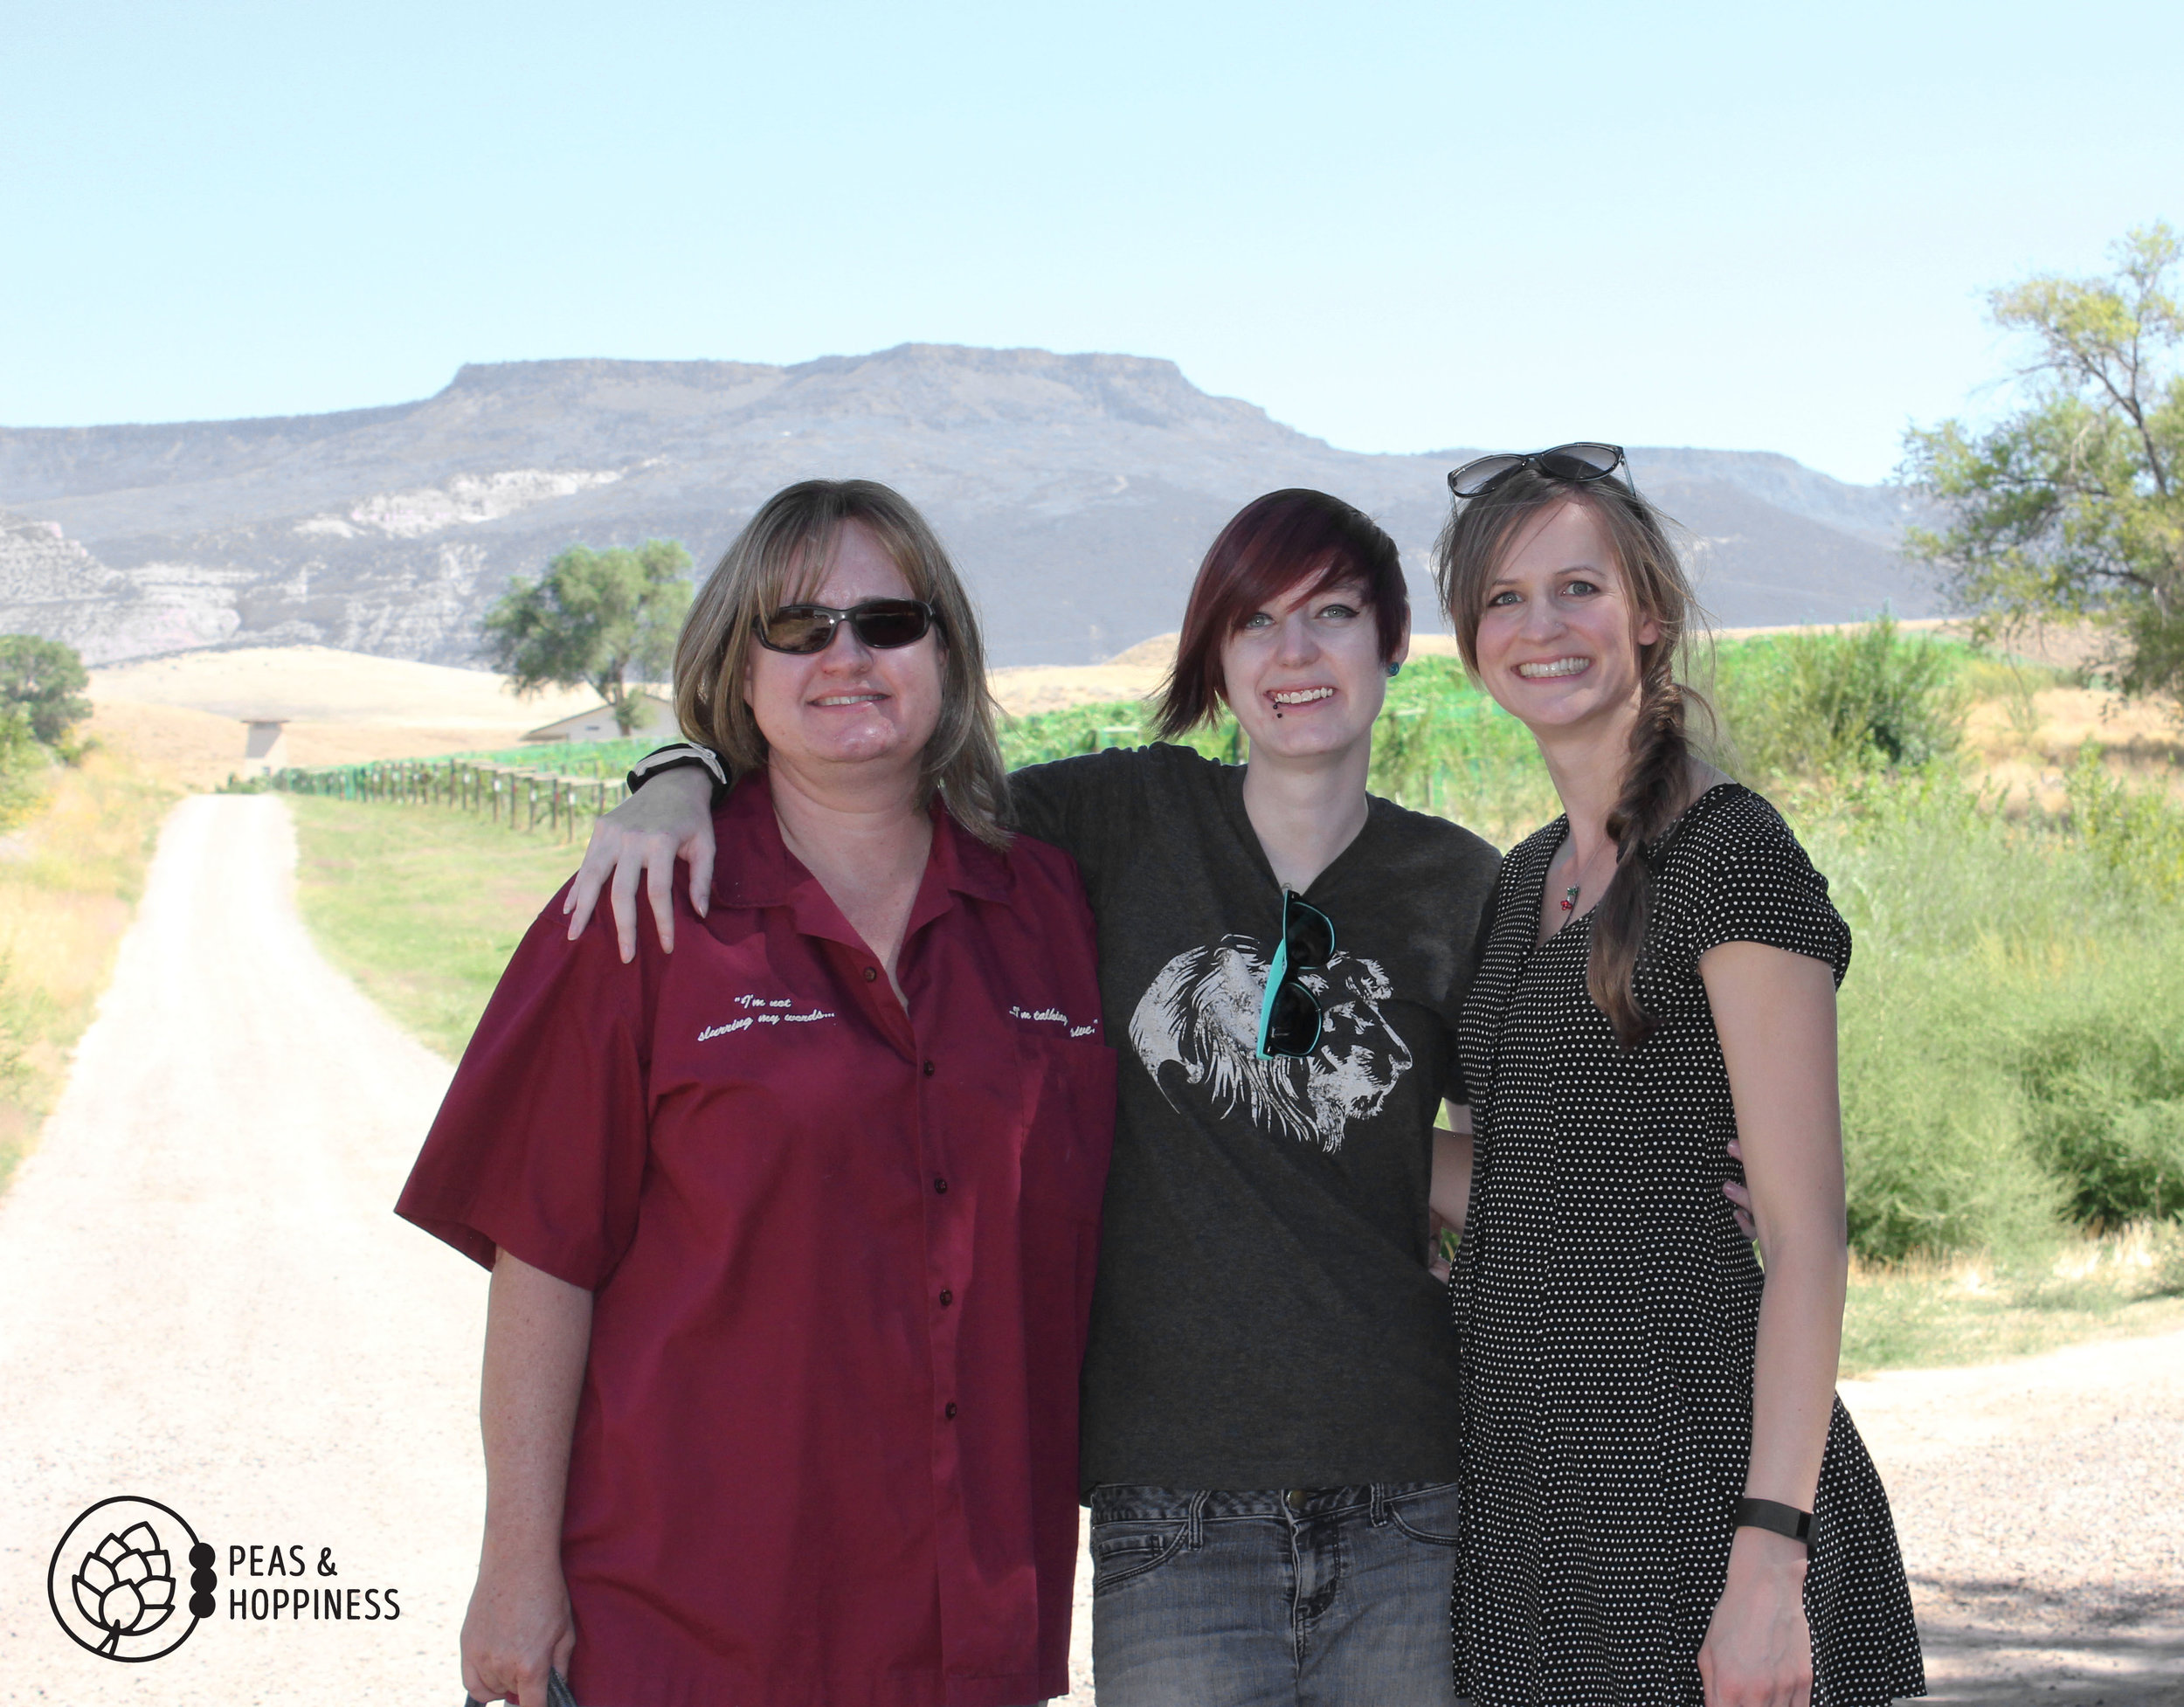 Lanette, Leanna, and me - with the grapes behind us and the mesa in the background.